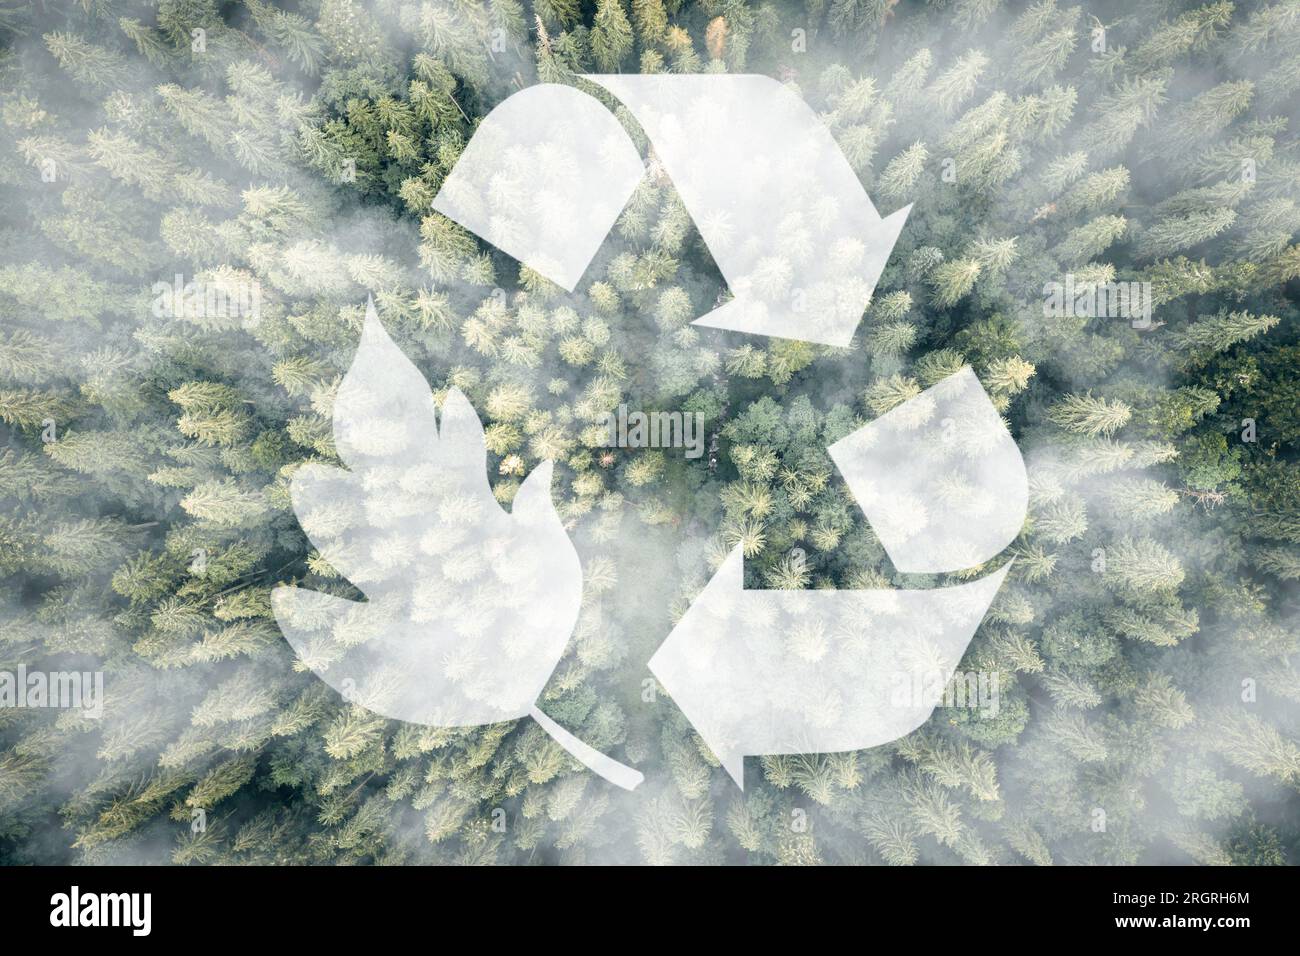 Recycle and Zero waste symbol in the middle of a beautiful untouched jungle for Sustainable environment development goals on Top view of nature. SDGs. Stock Photo